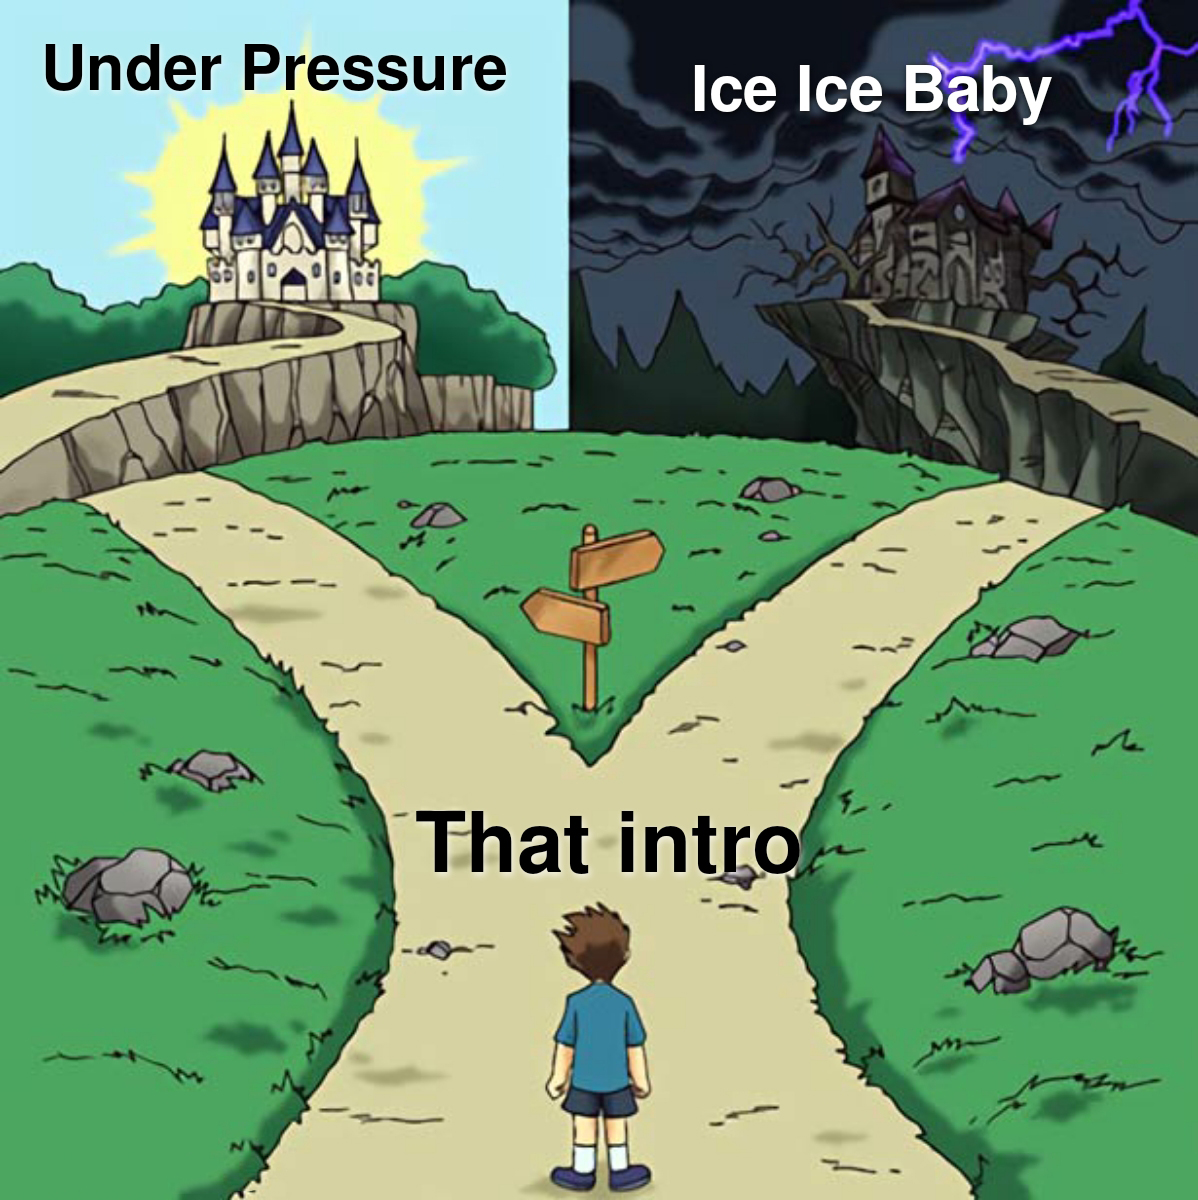 dank memes - funny memes - dramatic crossroads meme template - Under Pressure Ice Ice Baby That intro